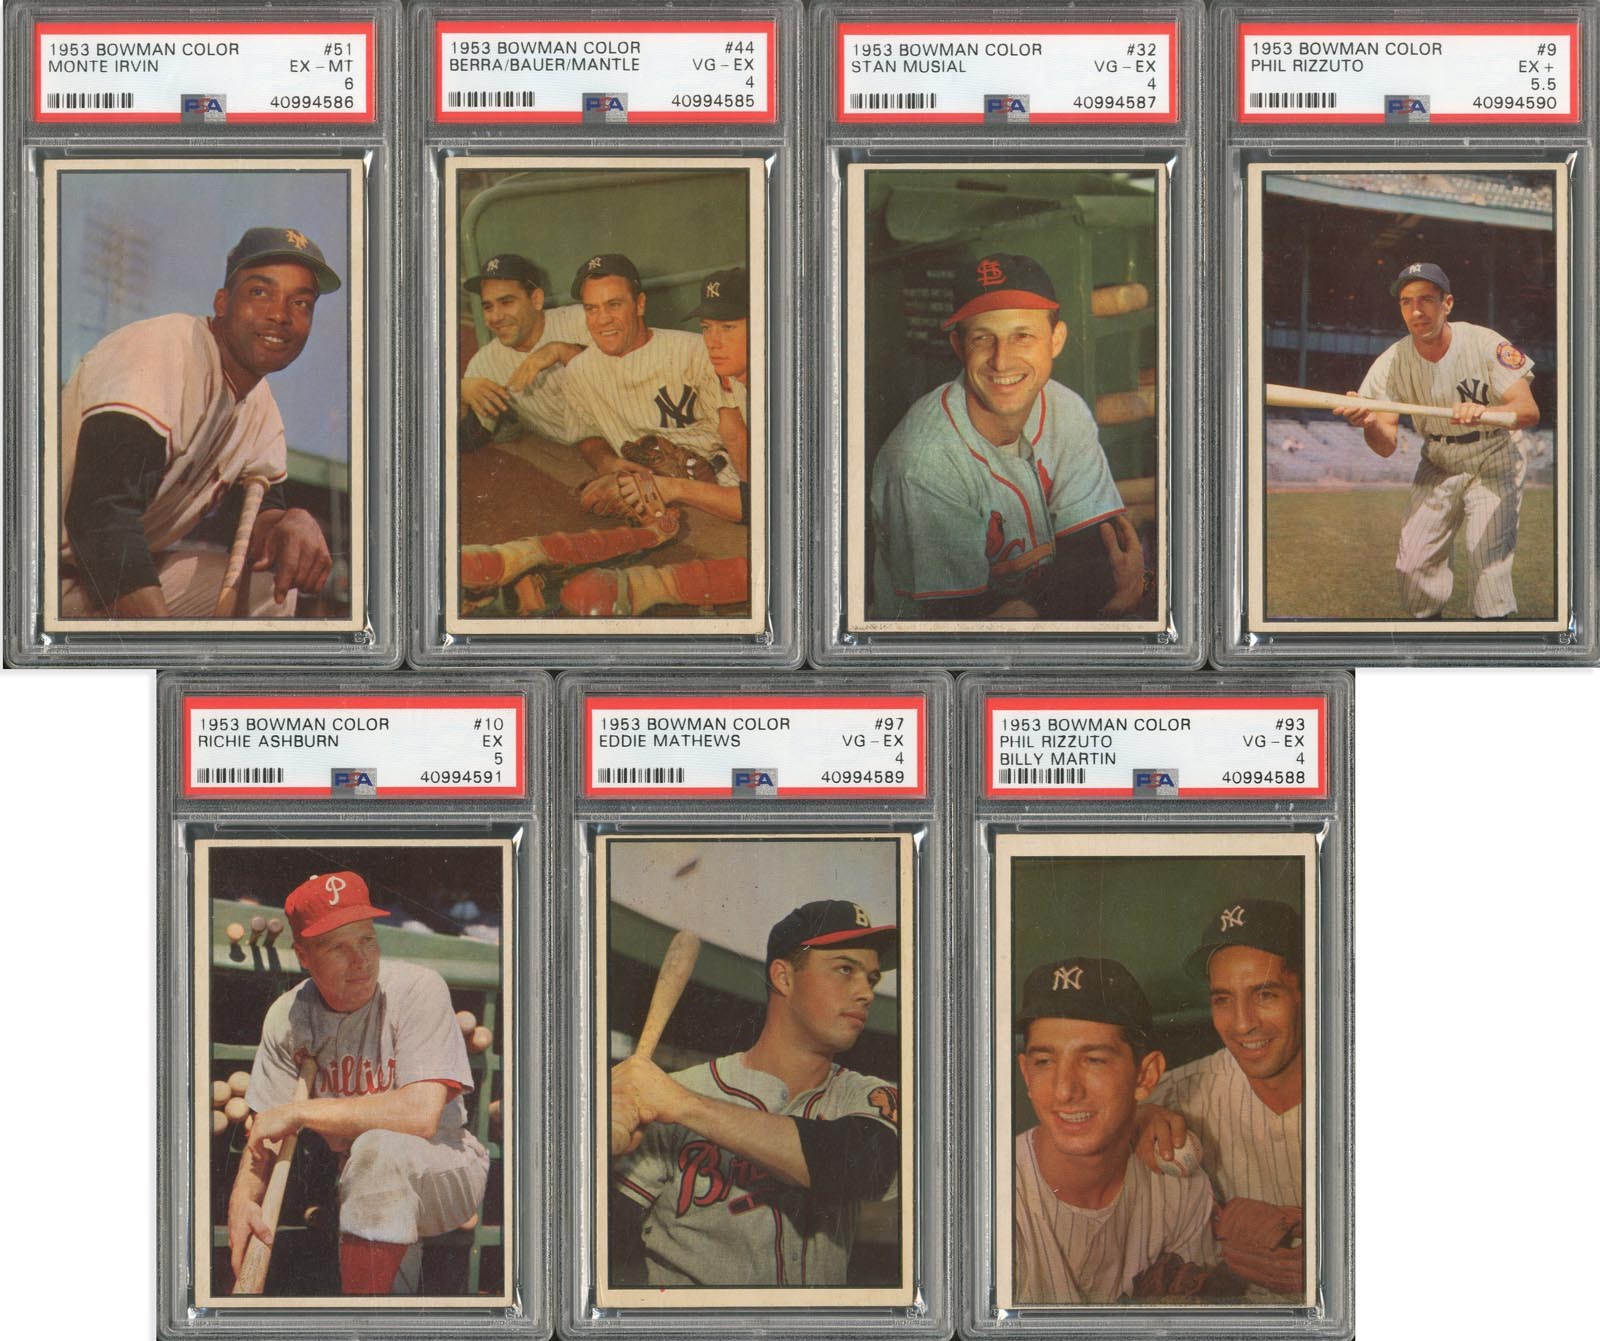 Baseball and Trading Cards - 1953 Bowman Color Partial Set (72/160)